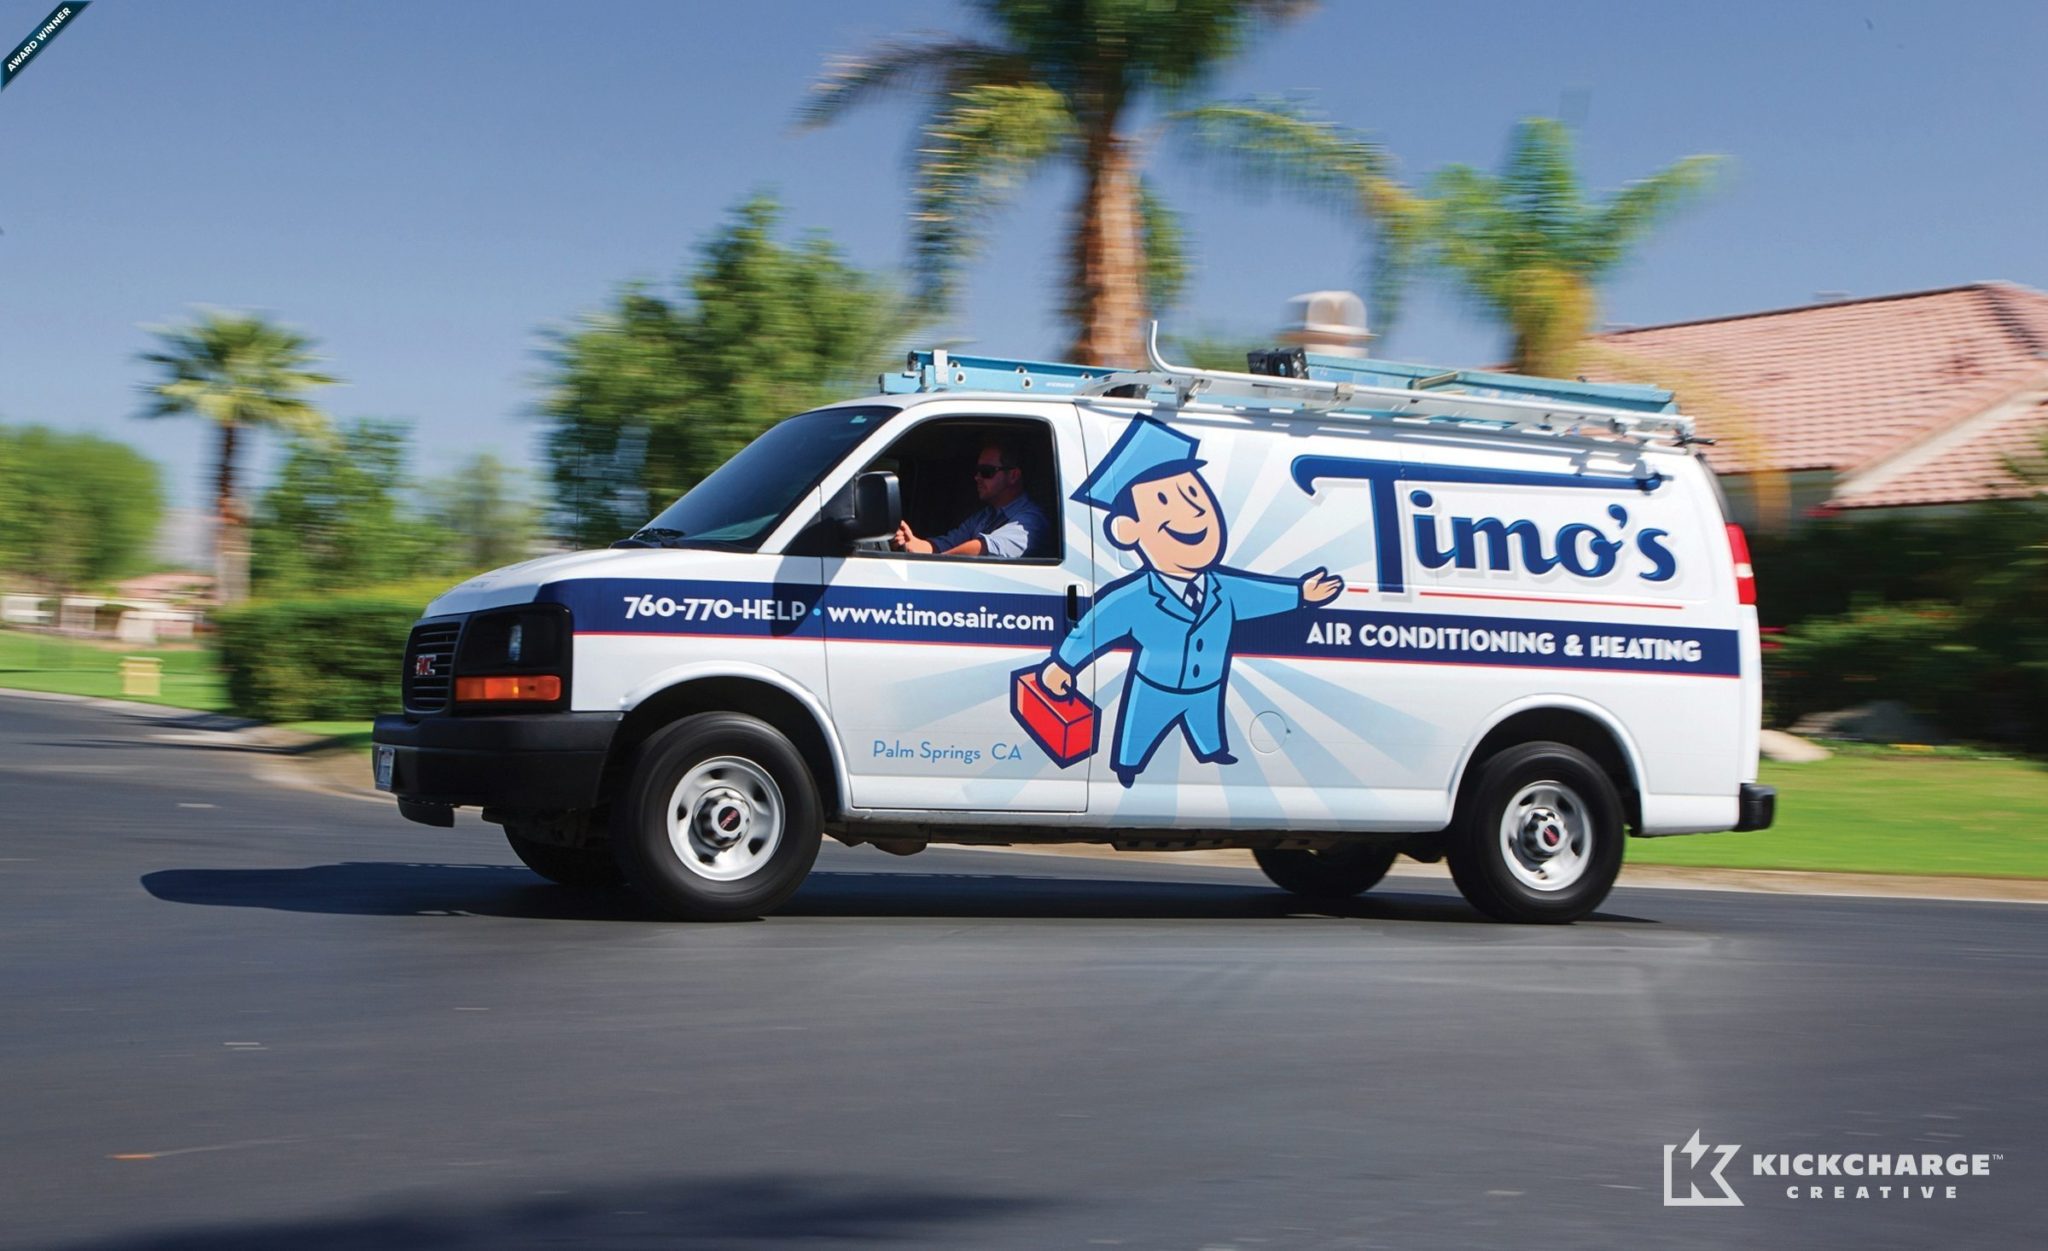 Vehicle wrap design for Timo's Air Conditioning & Heating.